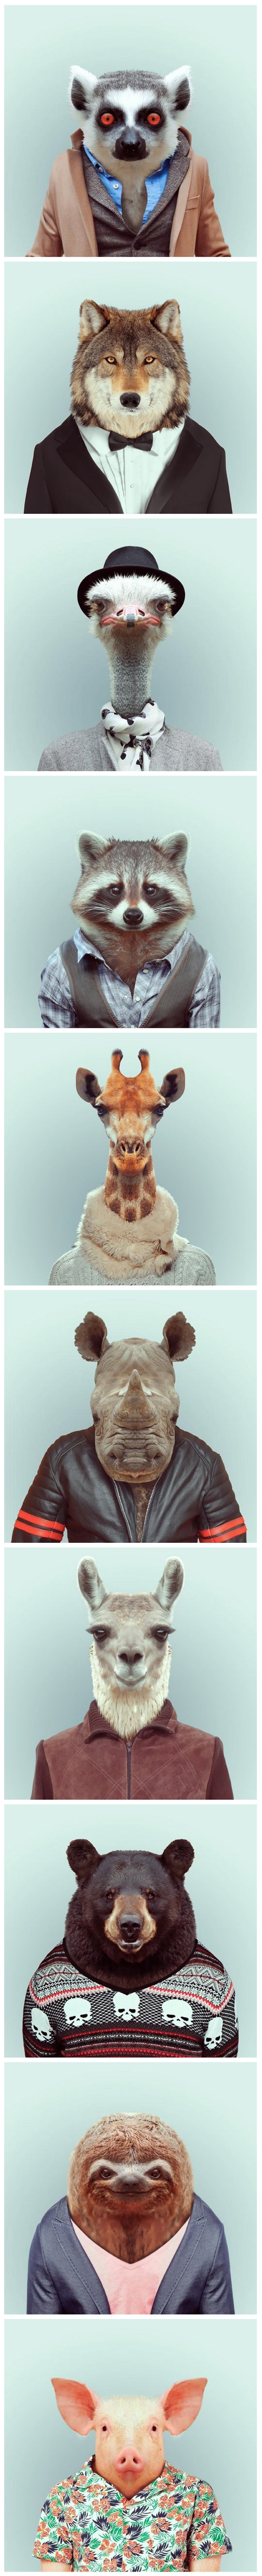 Extremely dapper animals.